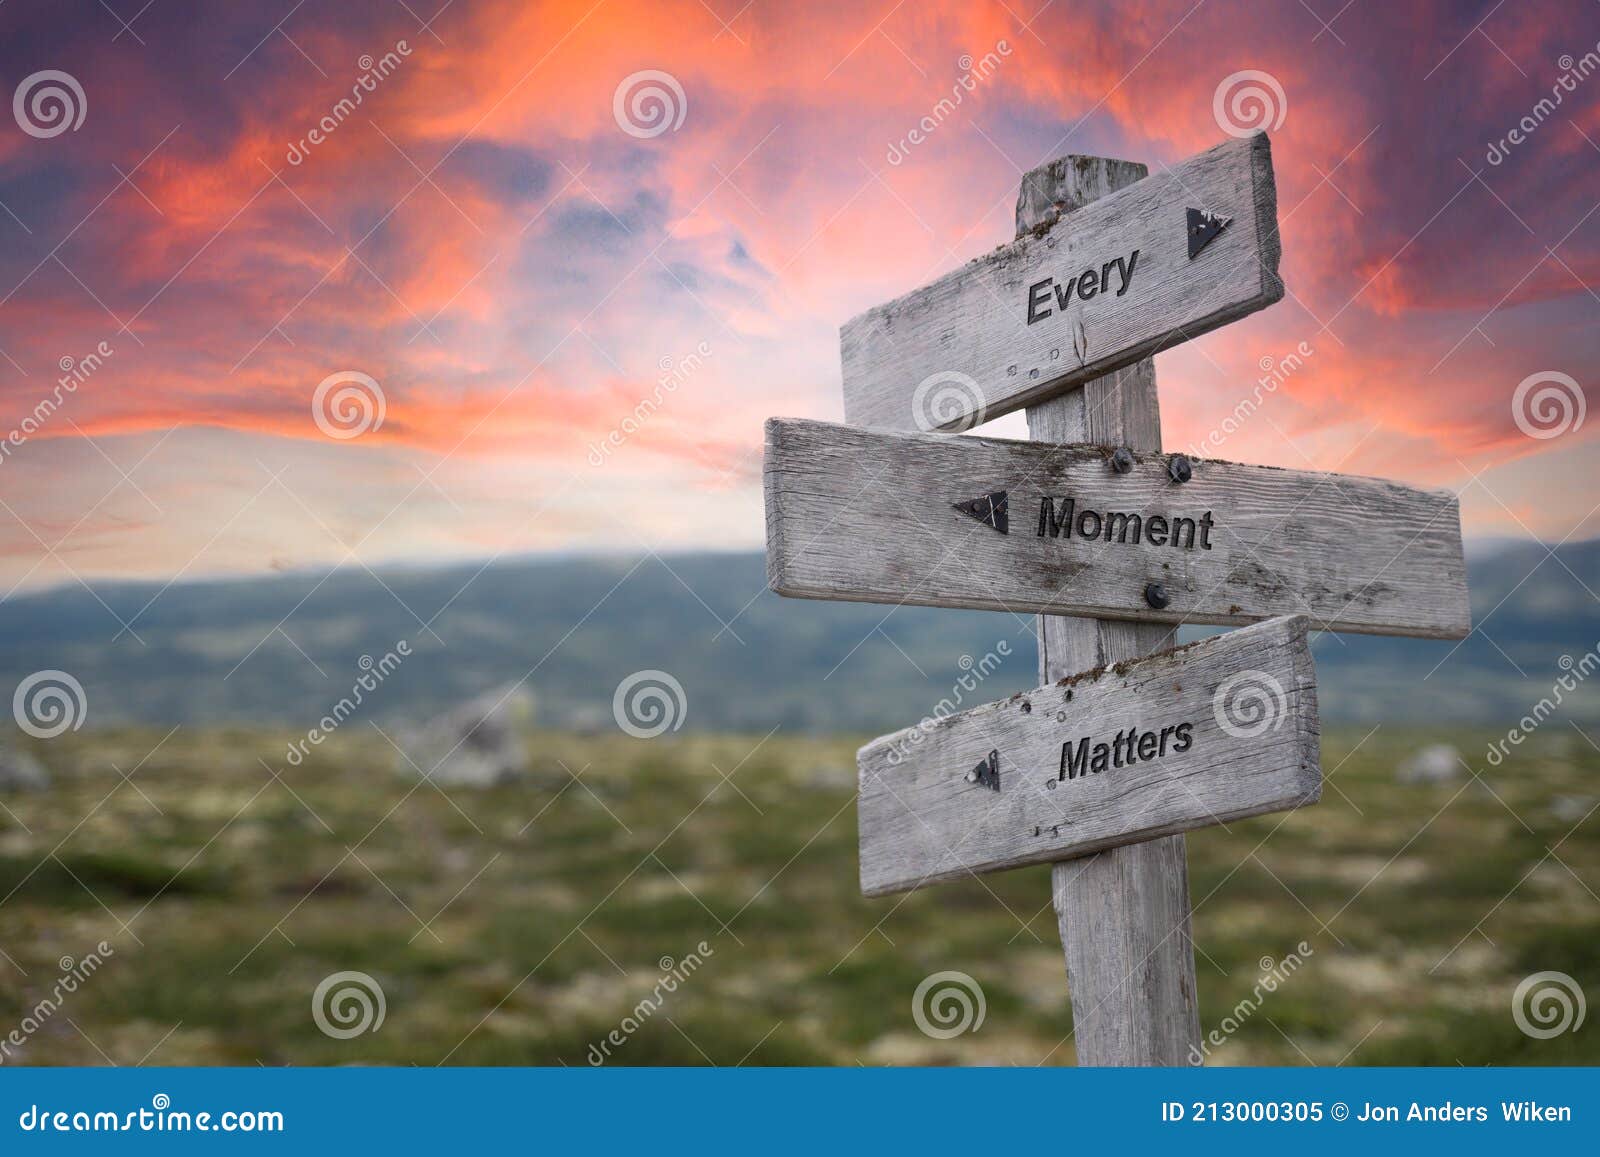 every moment matters text engraved in wooden signpost outdoors in nature during sunset